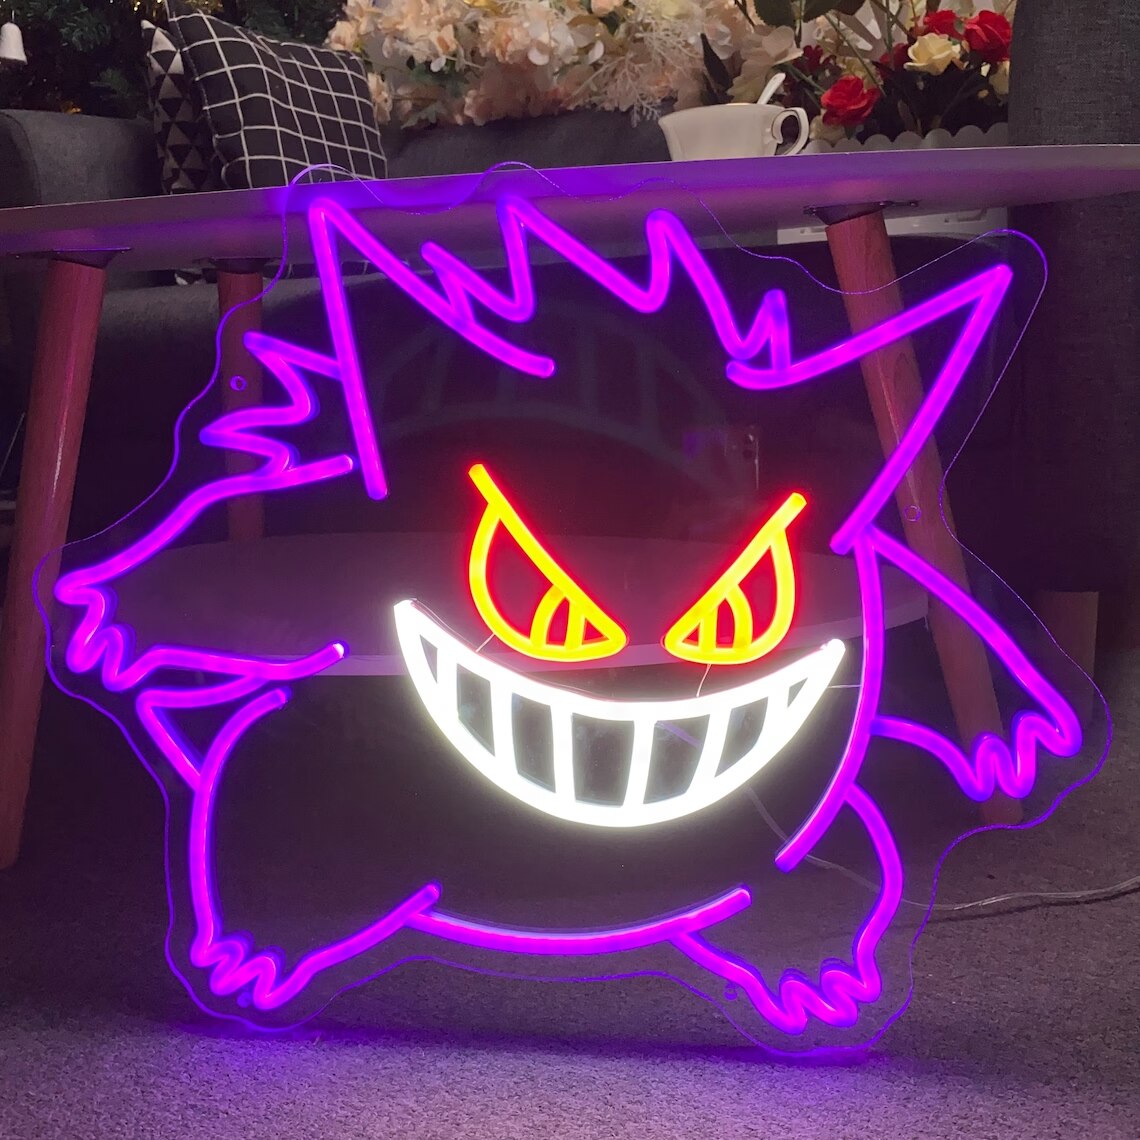 Gengar Neon Sign Ghost Led Neon Signs Anime Neon Sign Gifts for Kids Teens Bedroom Game Room Animation Monster Led Neon Night Lamp Home Party